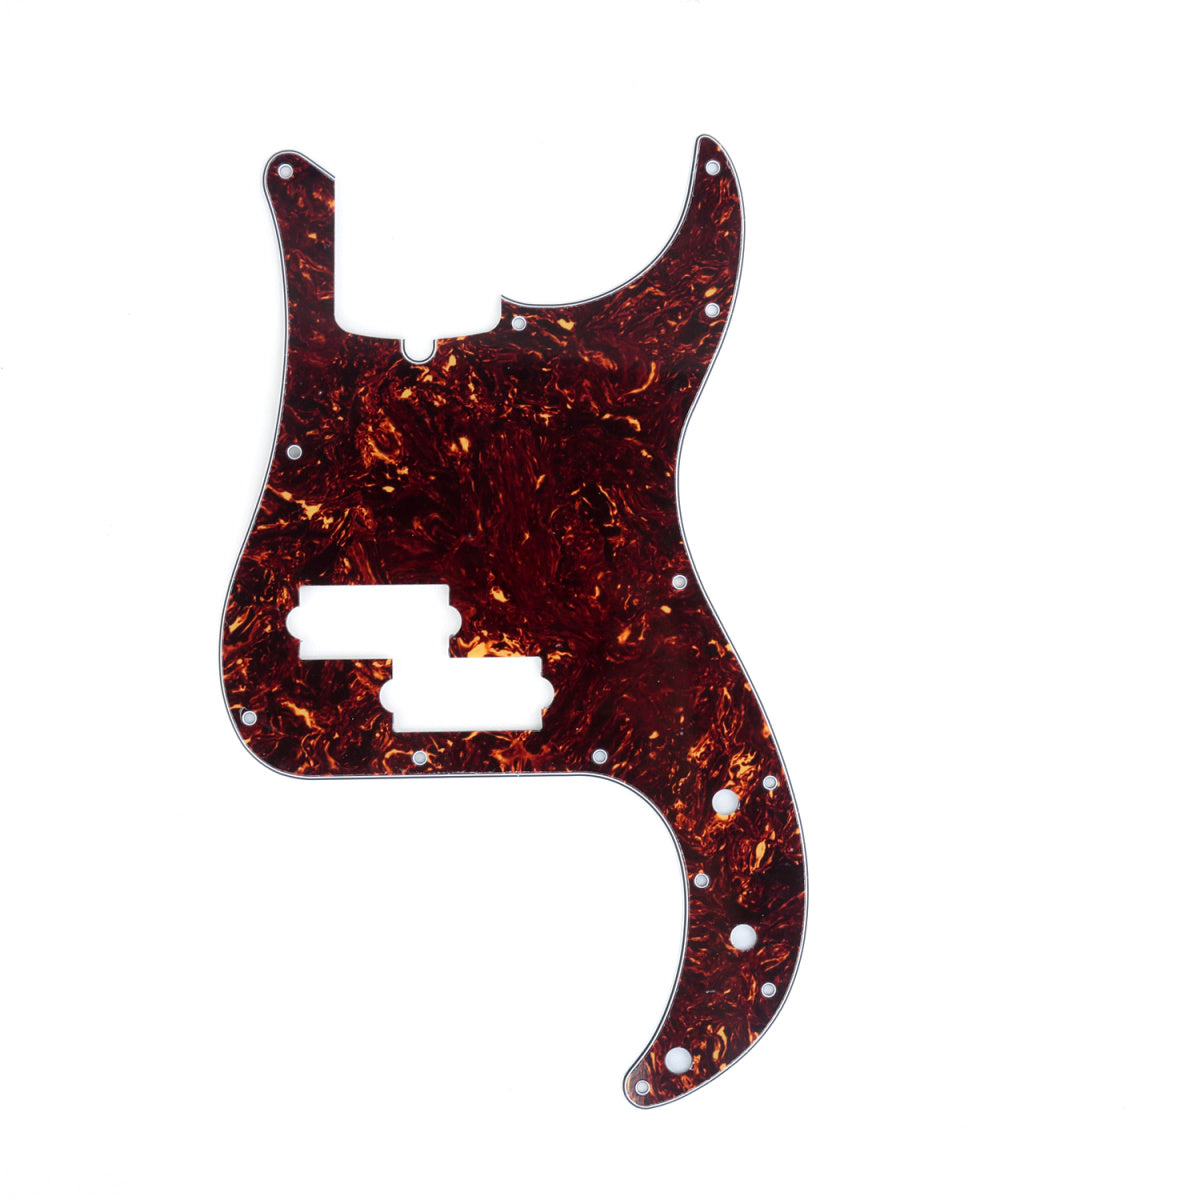 Musiclily Pro 13-Hole Modern Style P Bass Pickguard for 4 String American Precision Bass, 4Ply Tortoise Shell